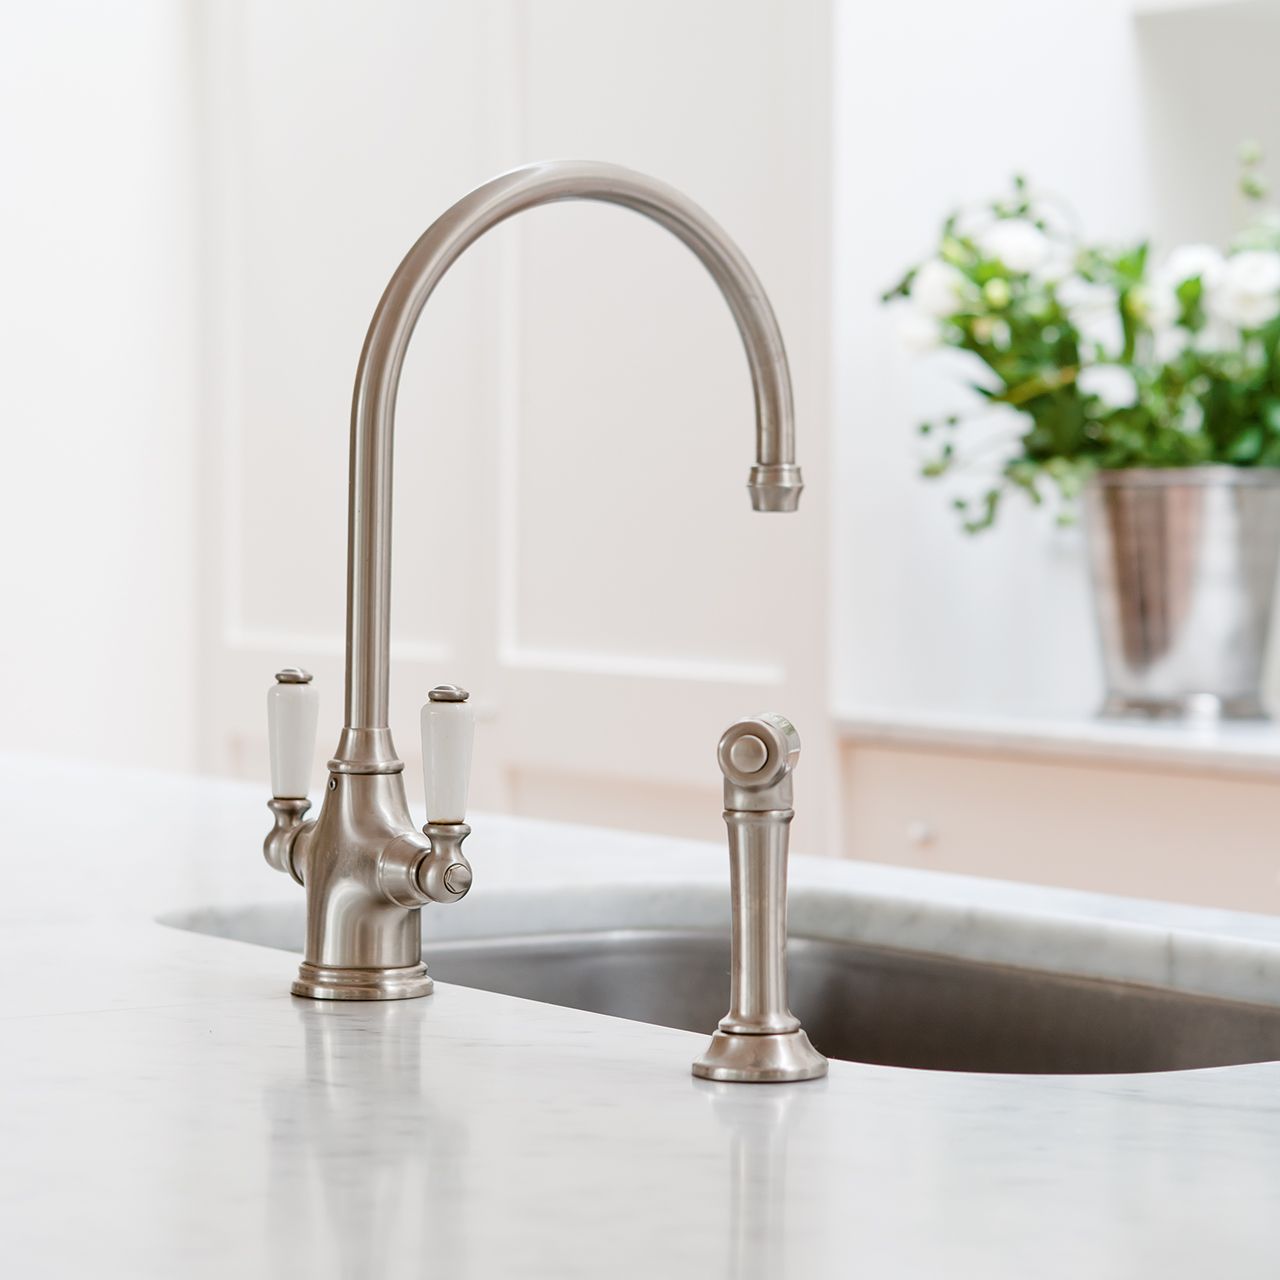 Perrin and Rowe 4360 Phoenician Tap with Rinse - Sinks-Taps.com